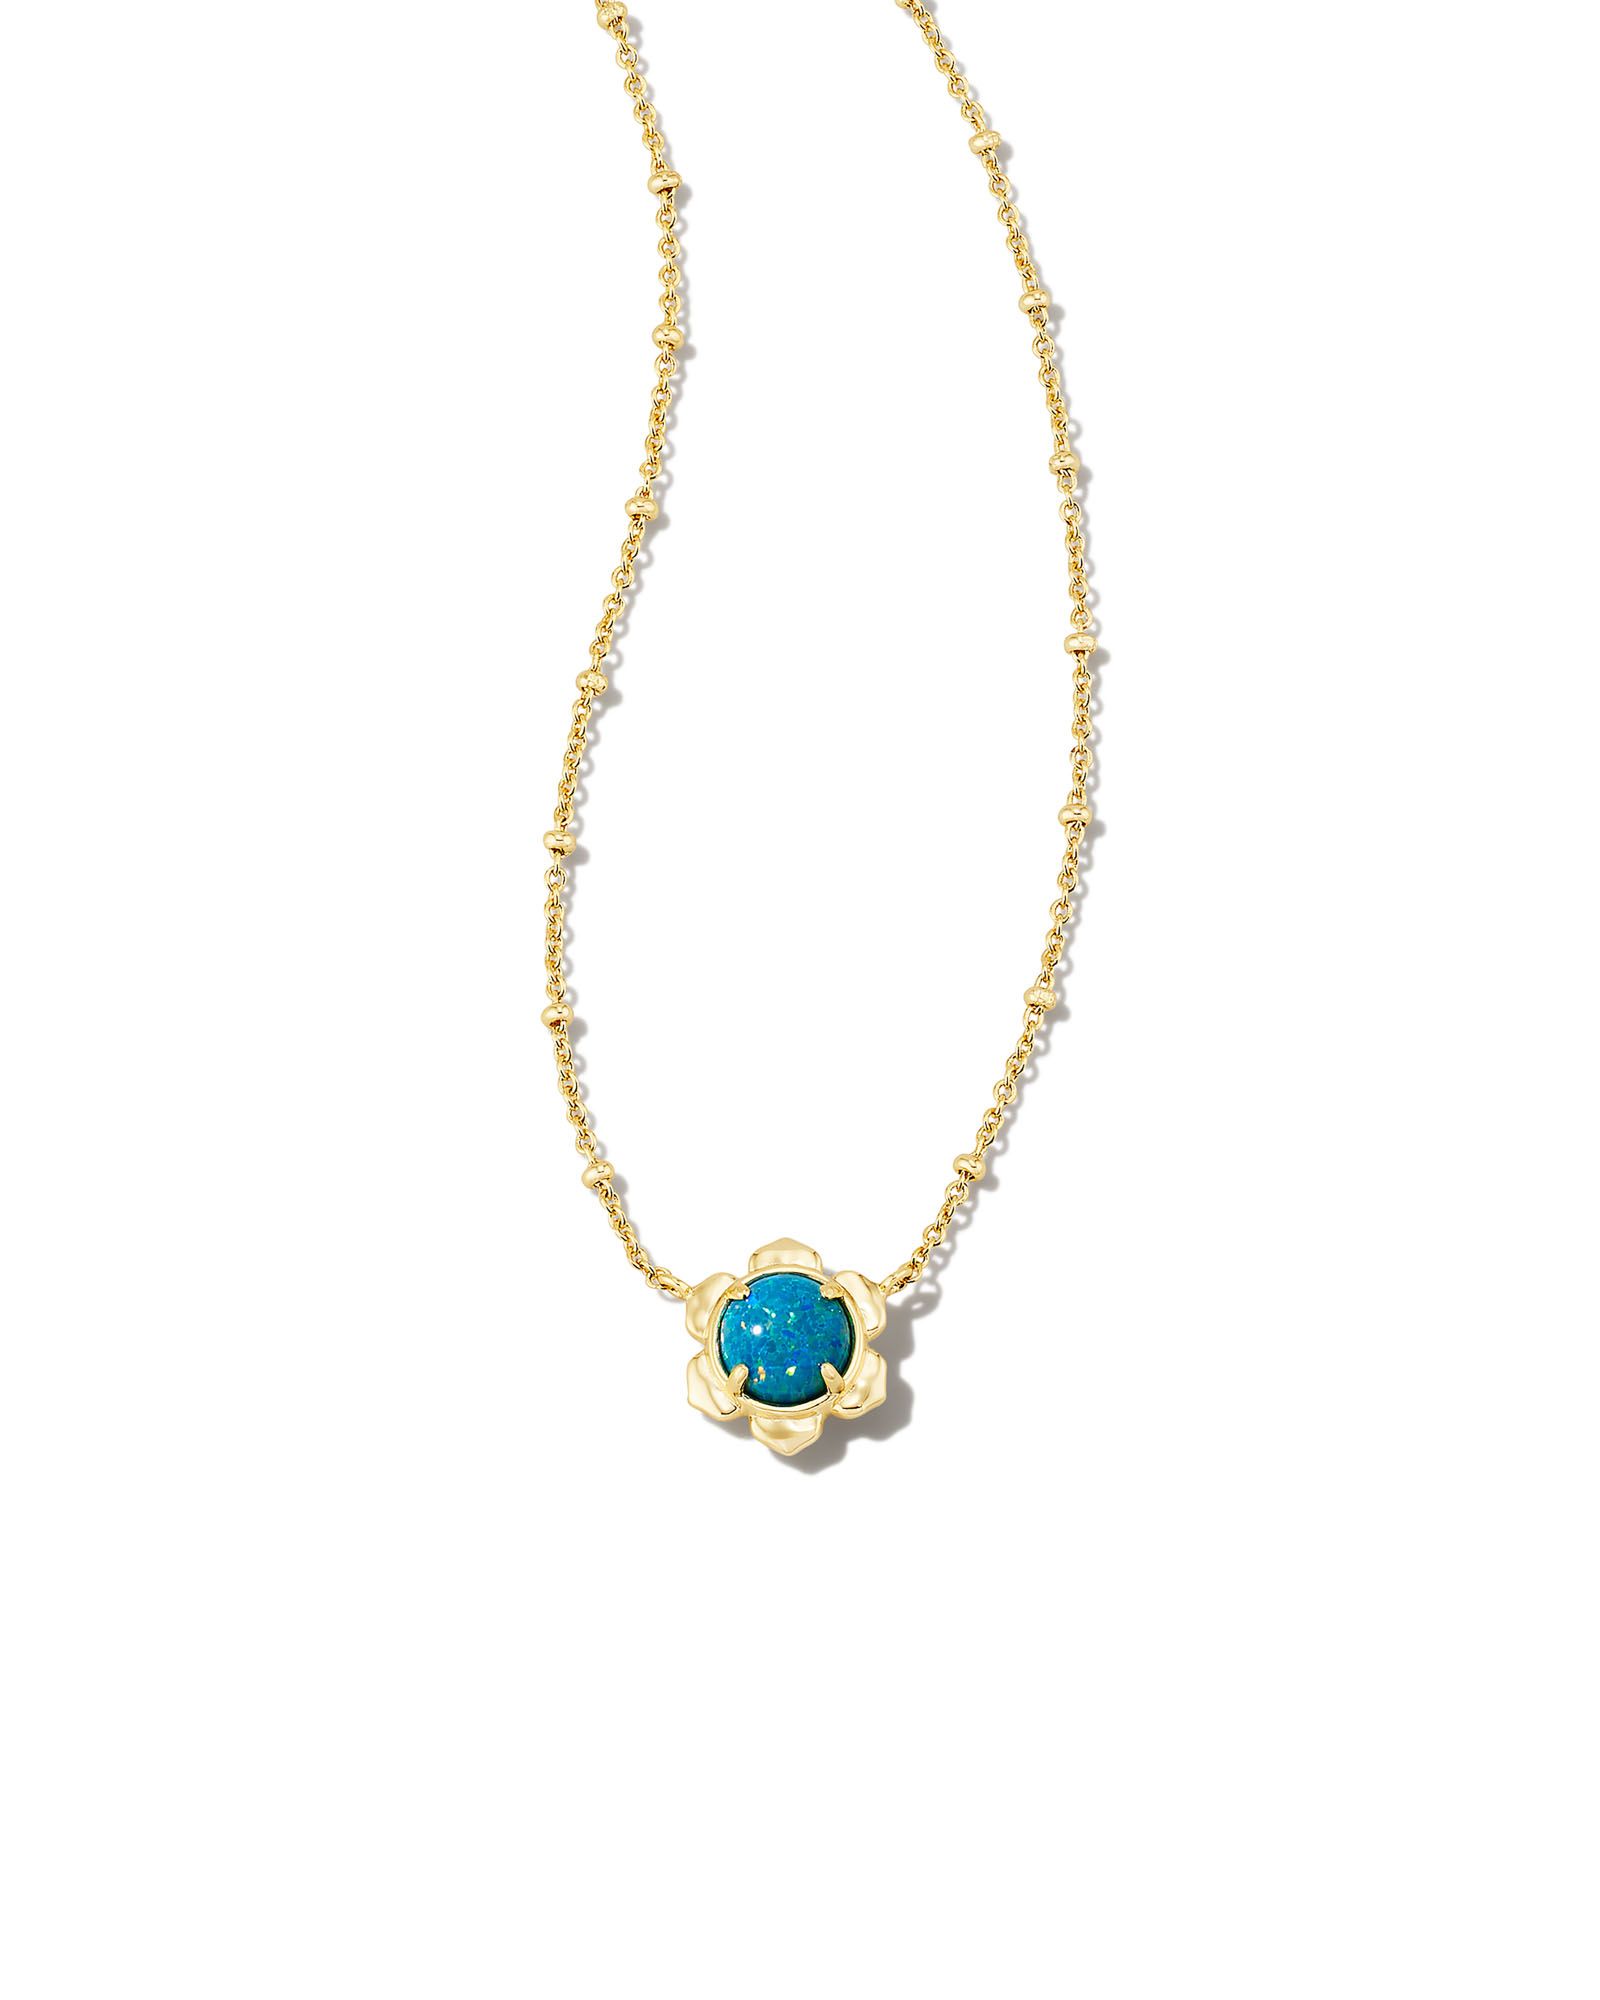 Susie Gold Short Pendant Necklace in Bright White Kyocera Opal | Kendra Scott